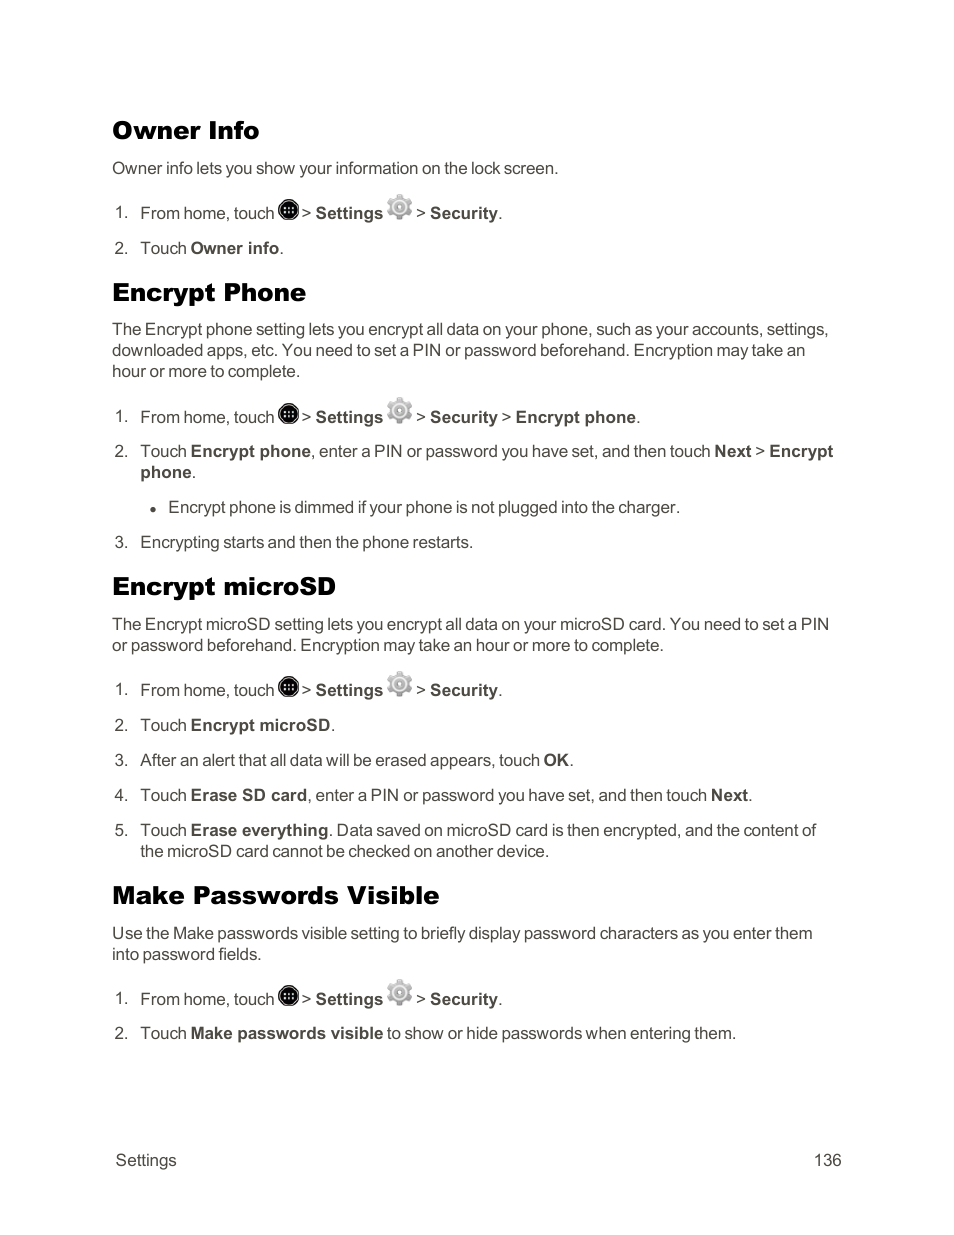 Owner info, Encrypt phone, Encrypt microsd | Make passwords visible | Sharp AQUOS Crystal User Manual | Page 146 / 171